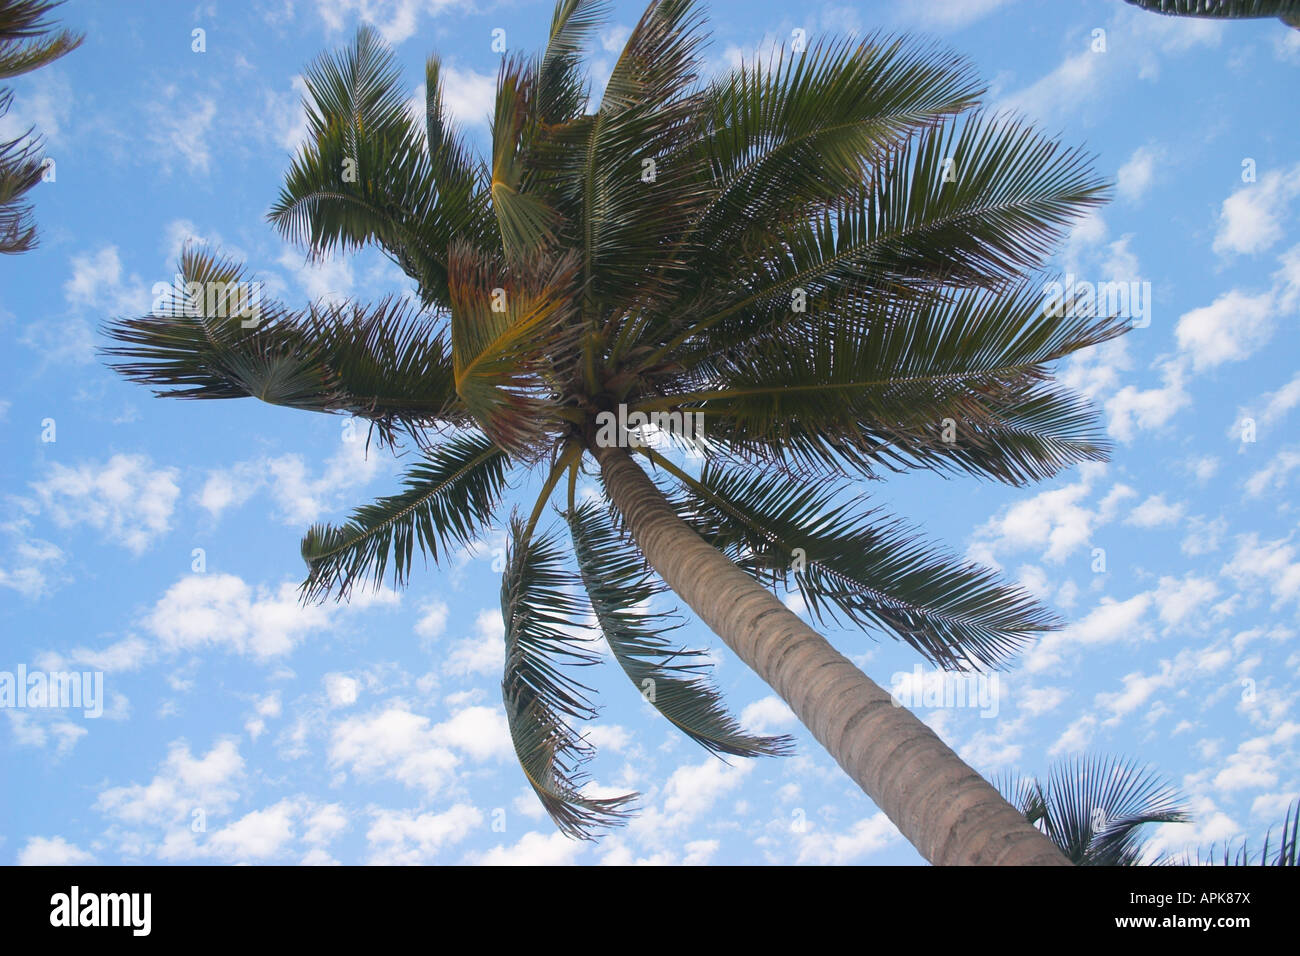 A Caye Caulker Belize Palm Tree with a pretty blue sky with a few clouds in the background Stock Photo